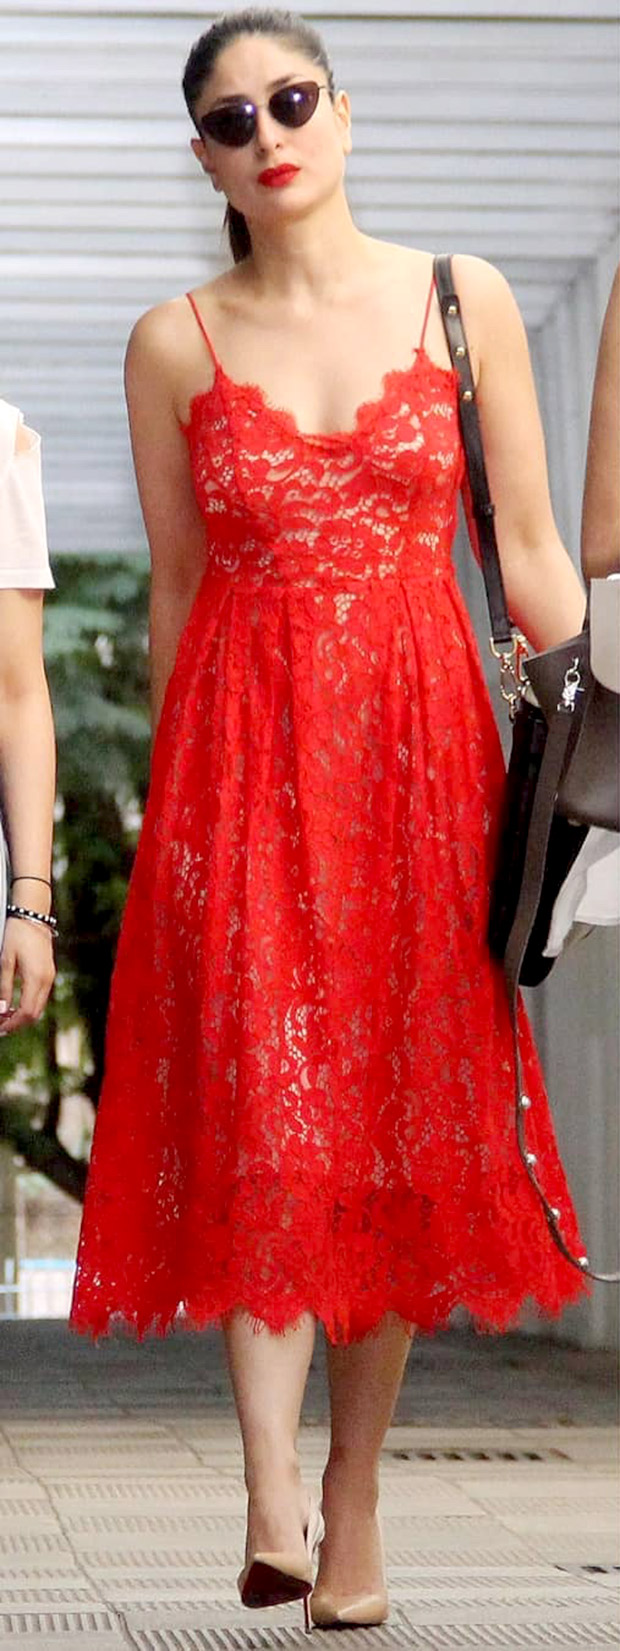 Kareena Kapoor Khan in H&M for a casual lunch date with cousins (2)